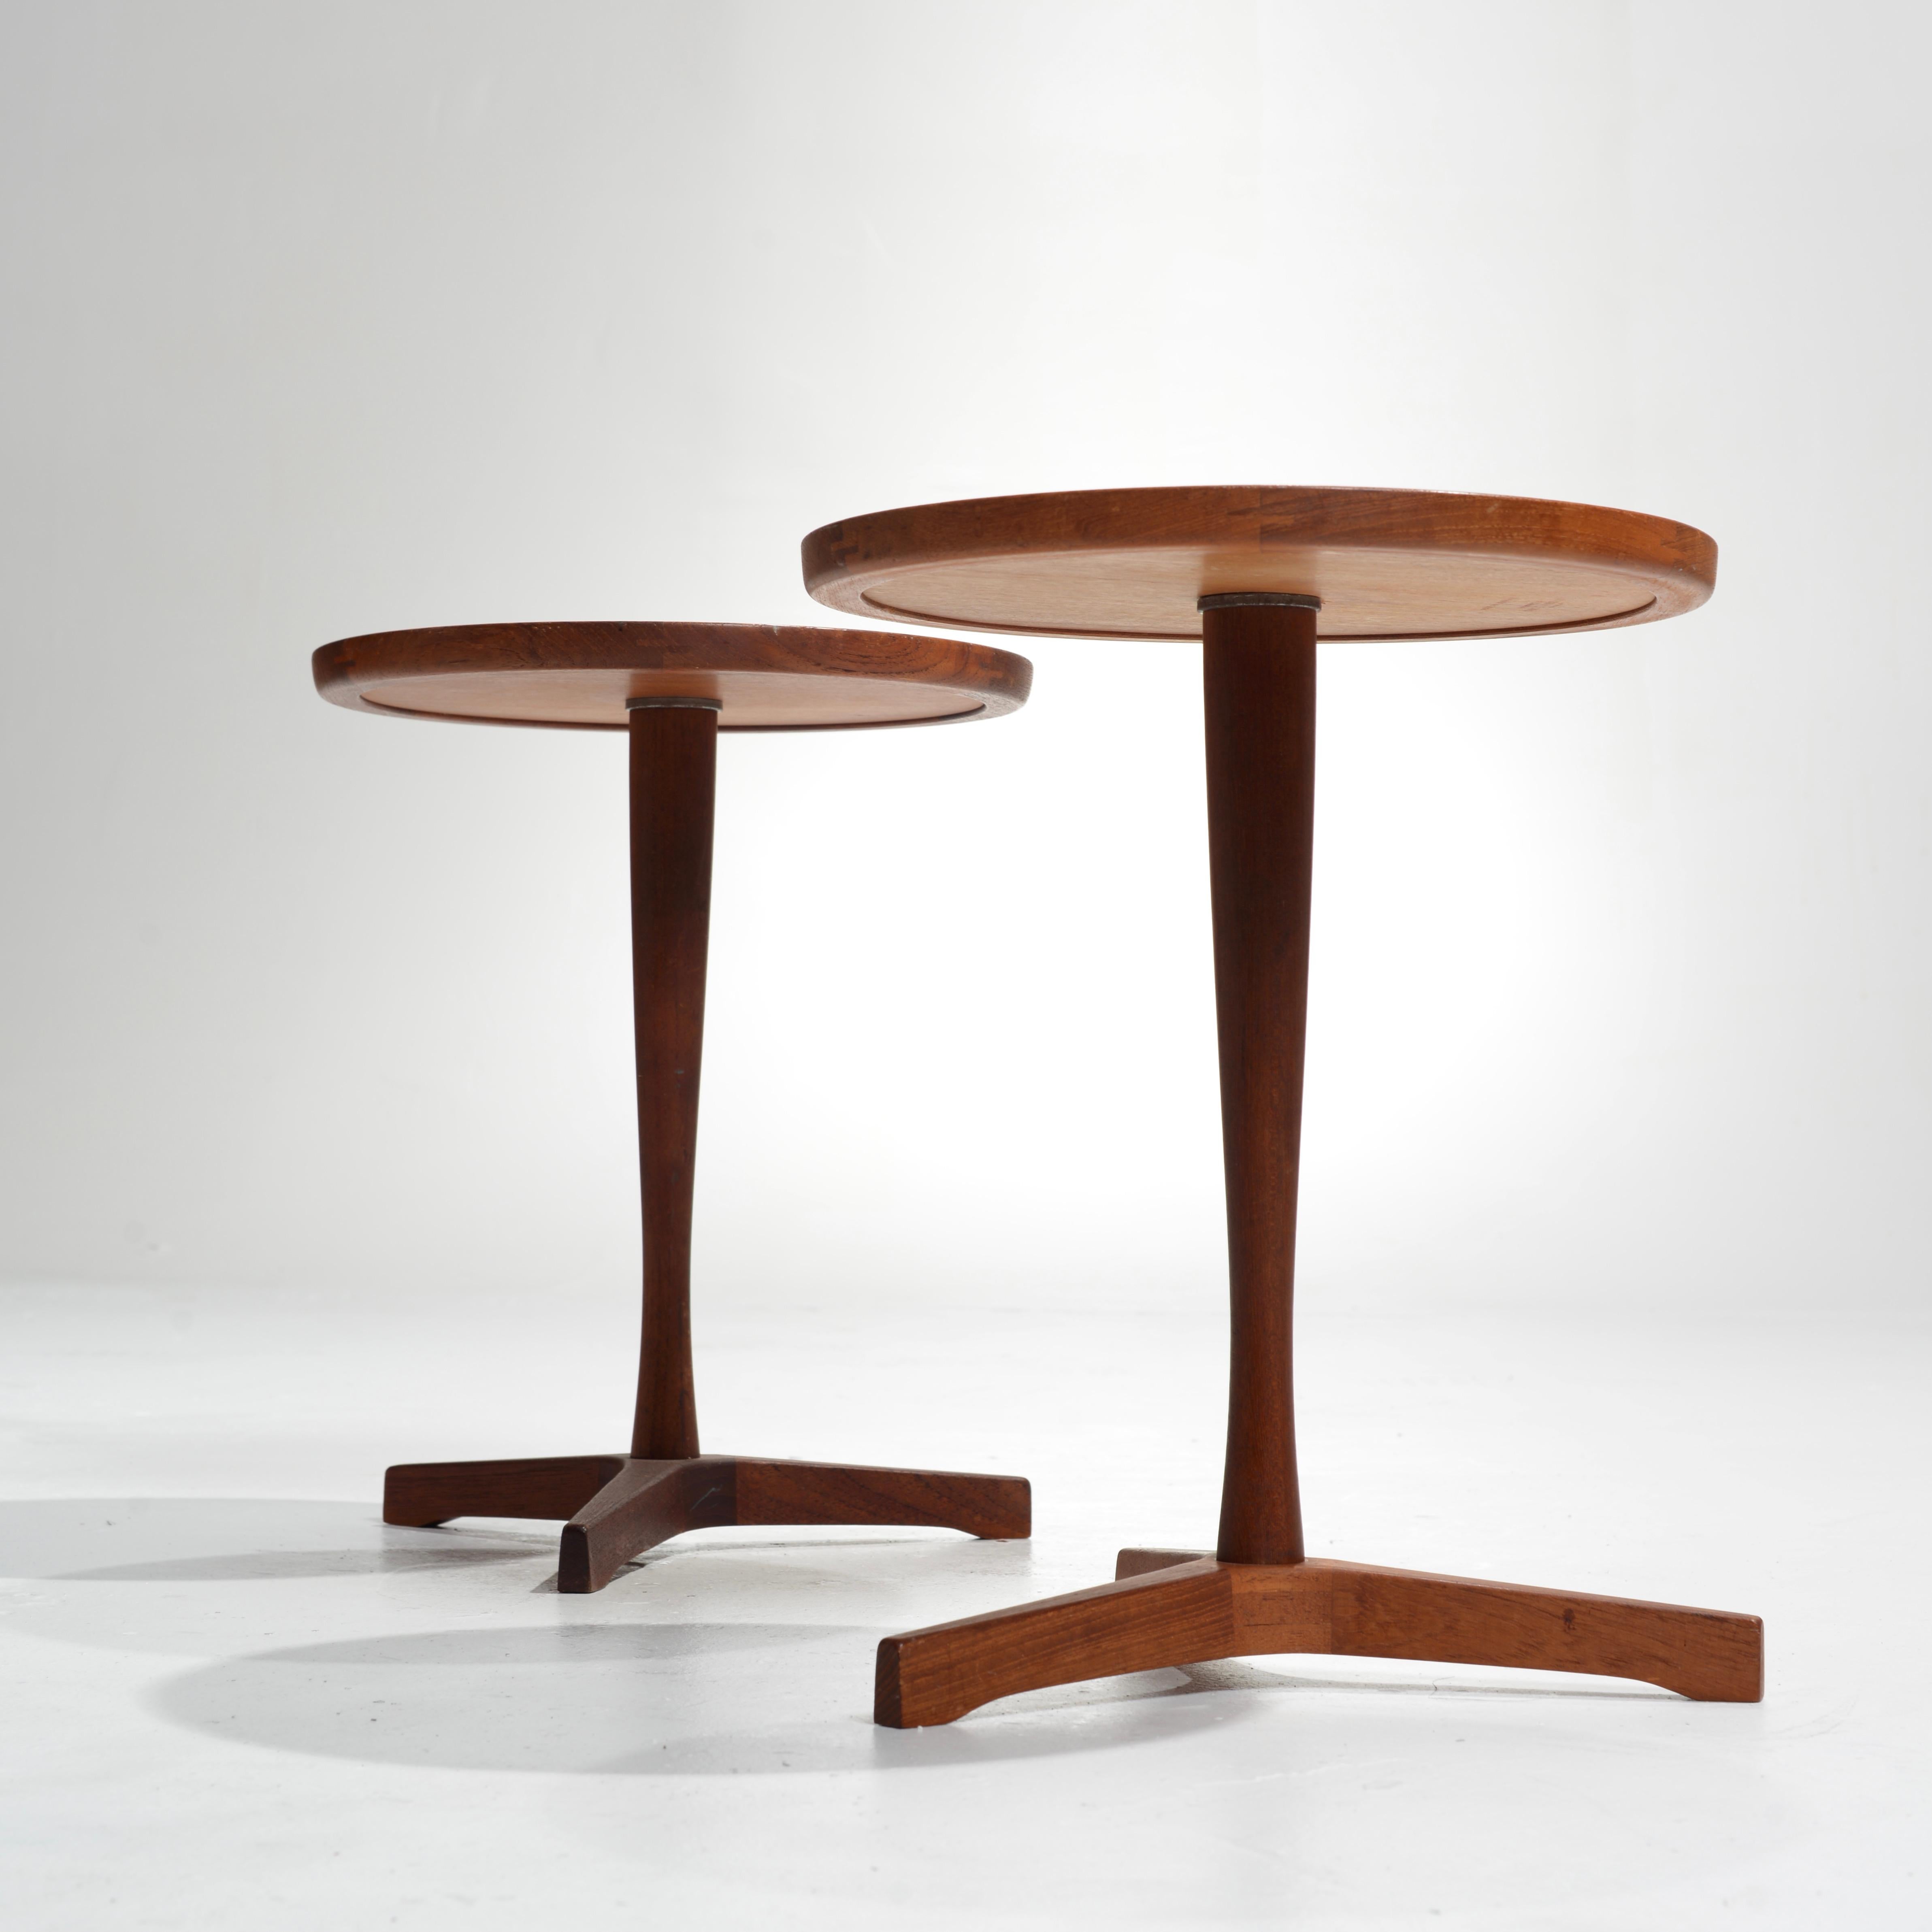 Rare Teak End Tables by Hans C. Andersen, 1950s For Sale 2